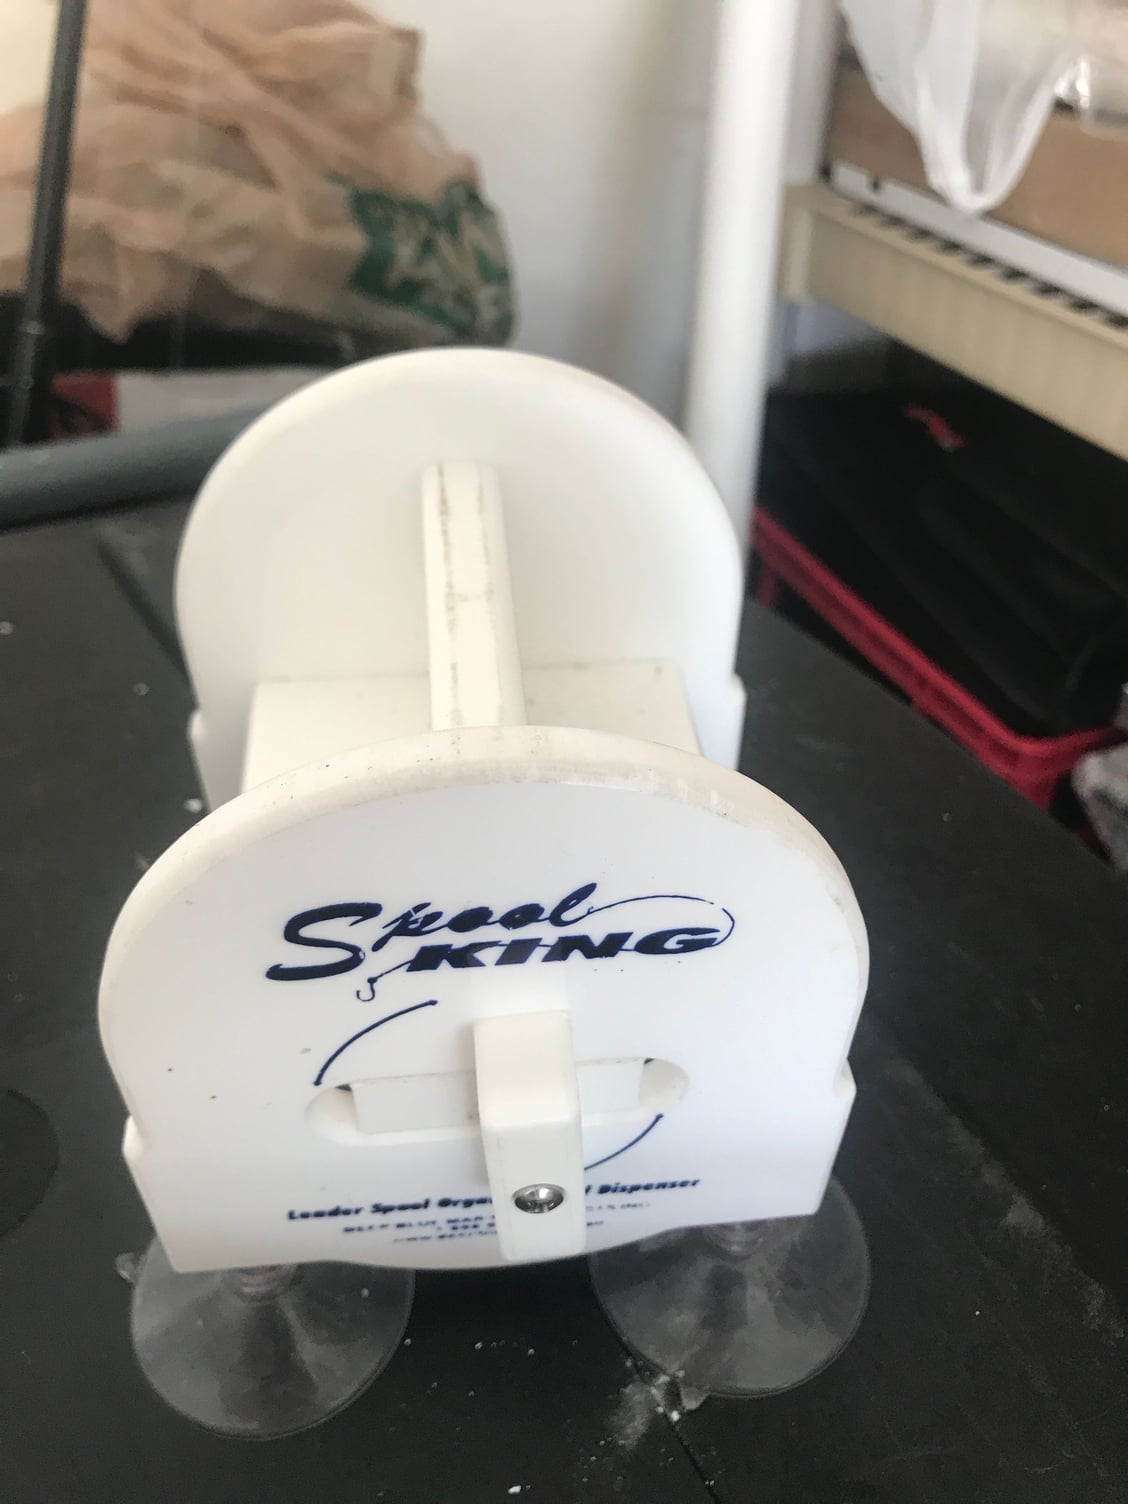 Spool King 3 spool leader holder - The Hull Truth - Boating and